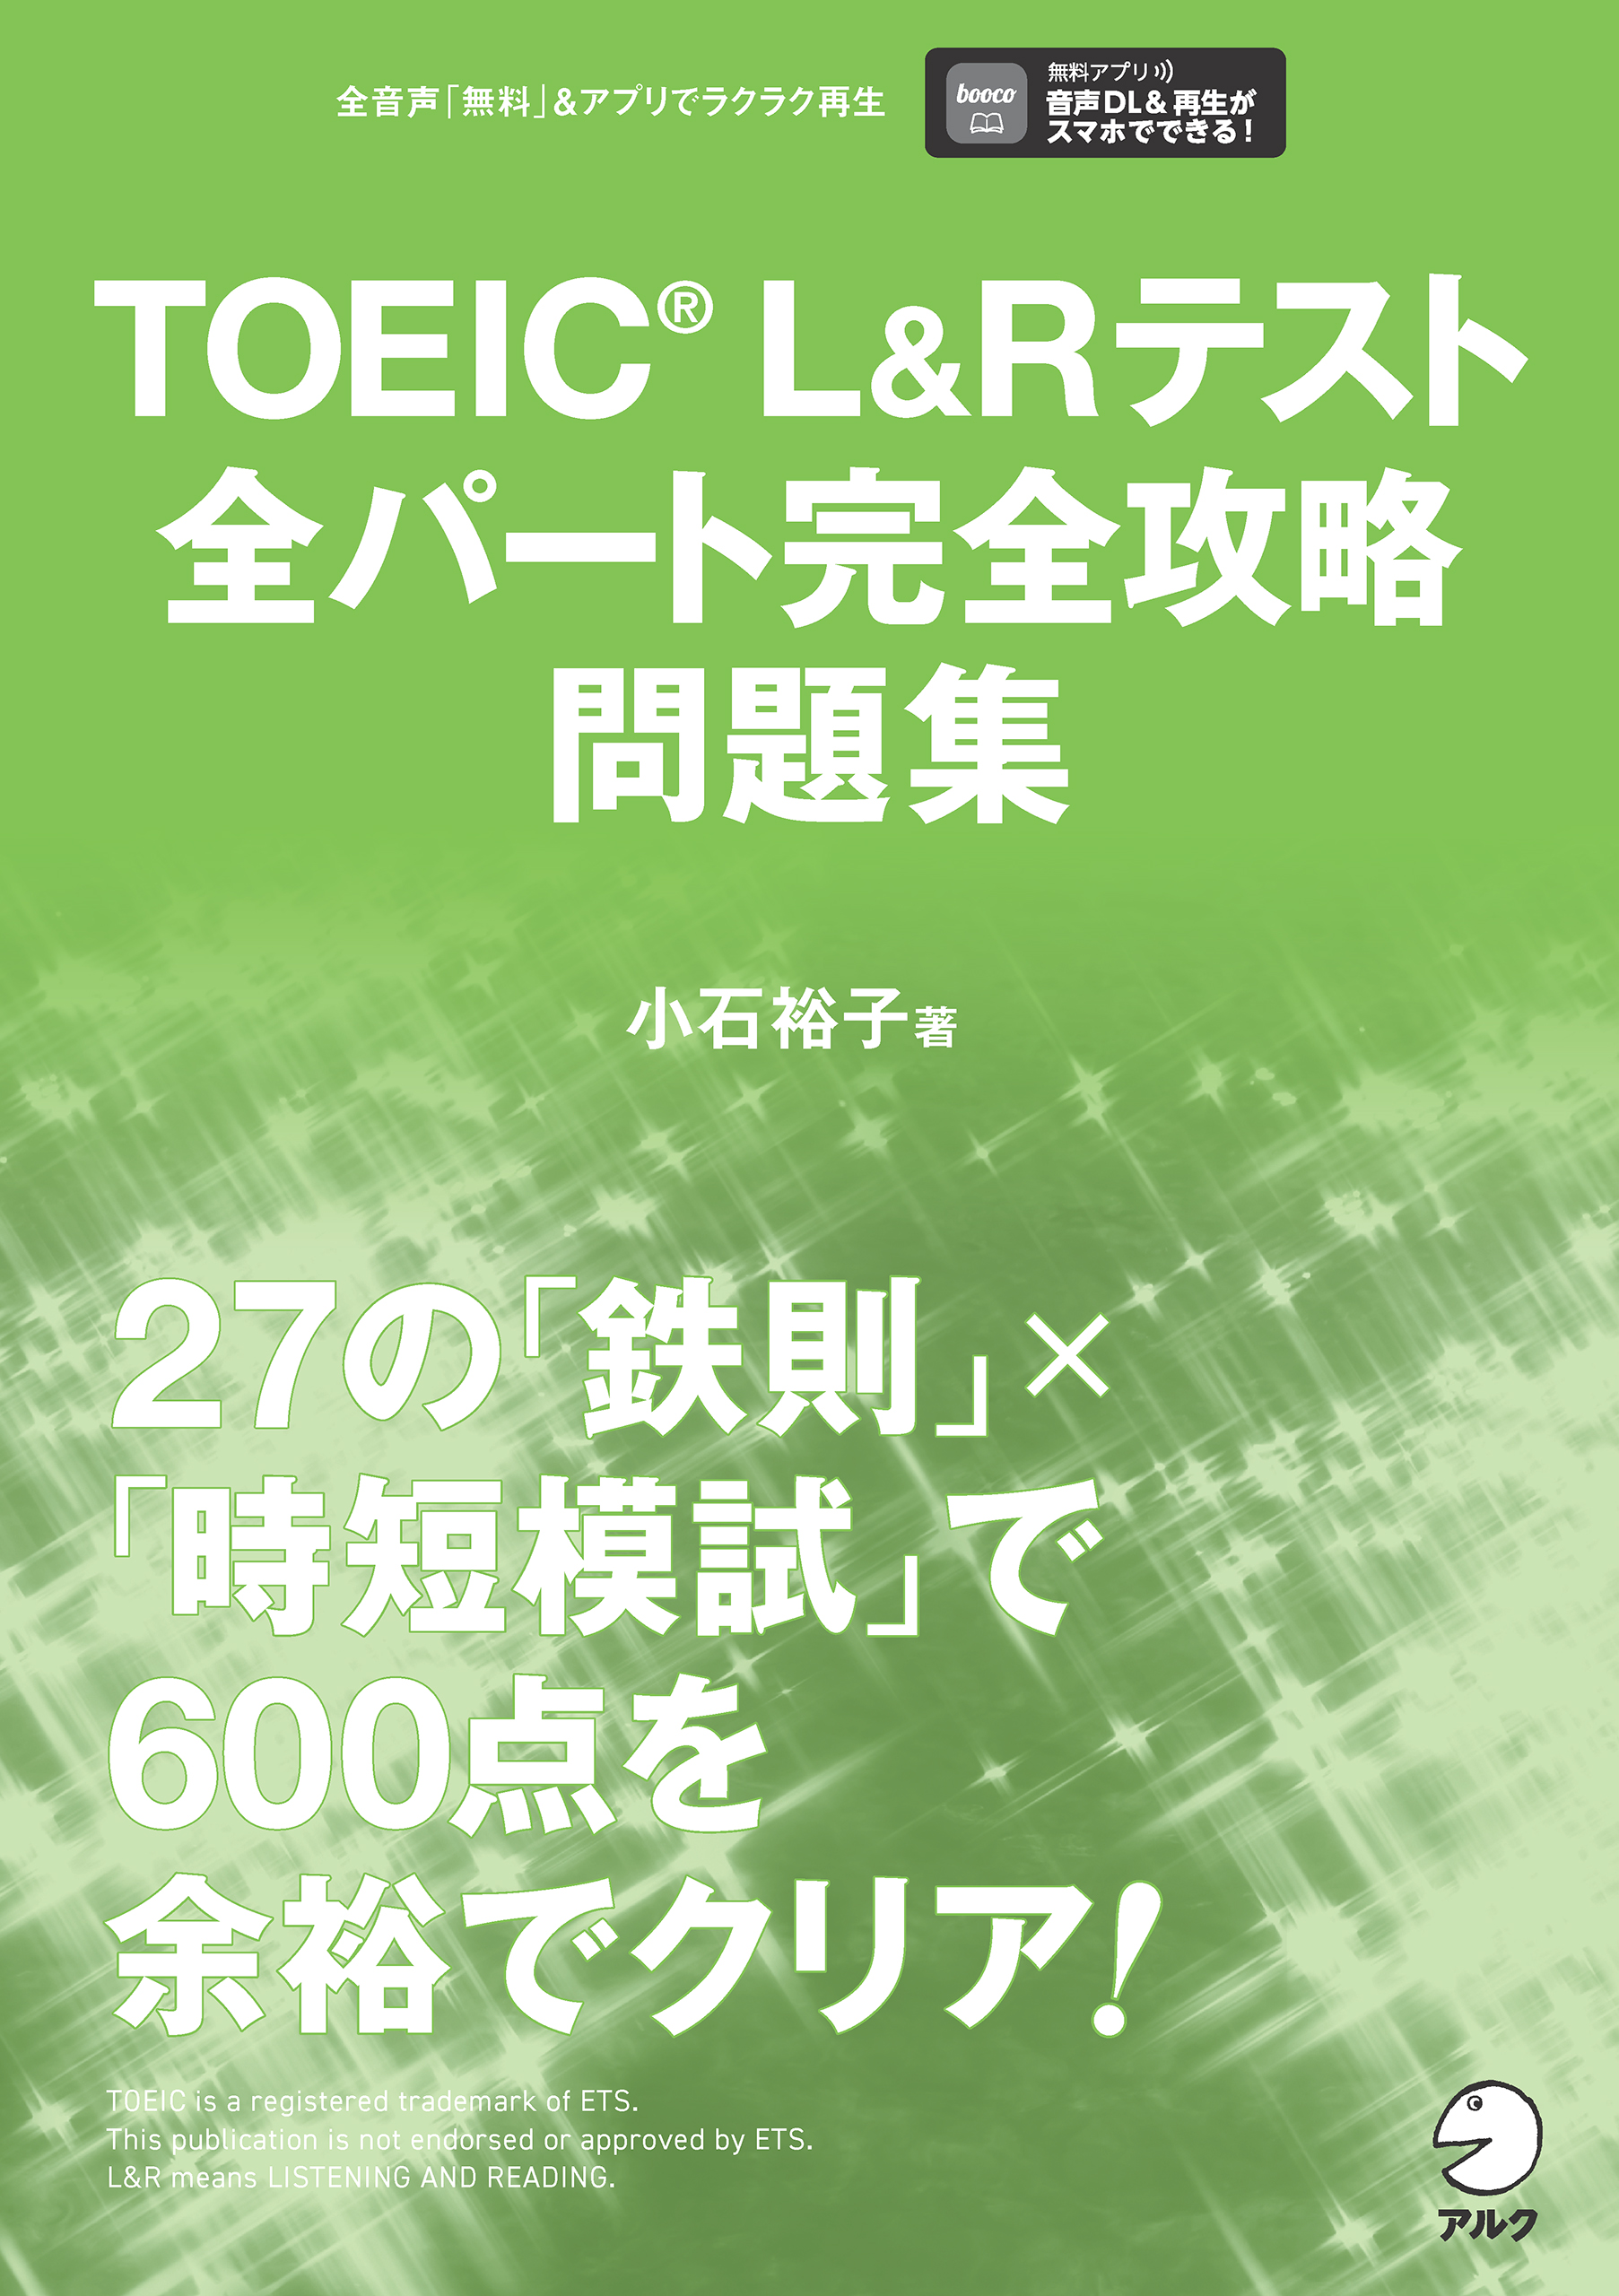 TOEIC 参考書 まとめ売り - 語学・辞書・学習参考書